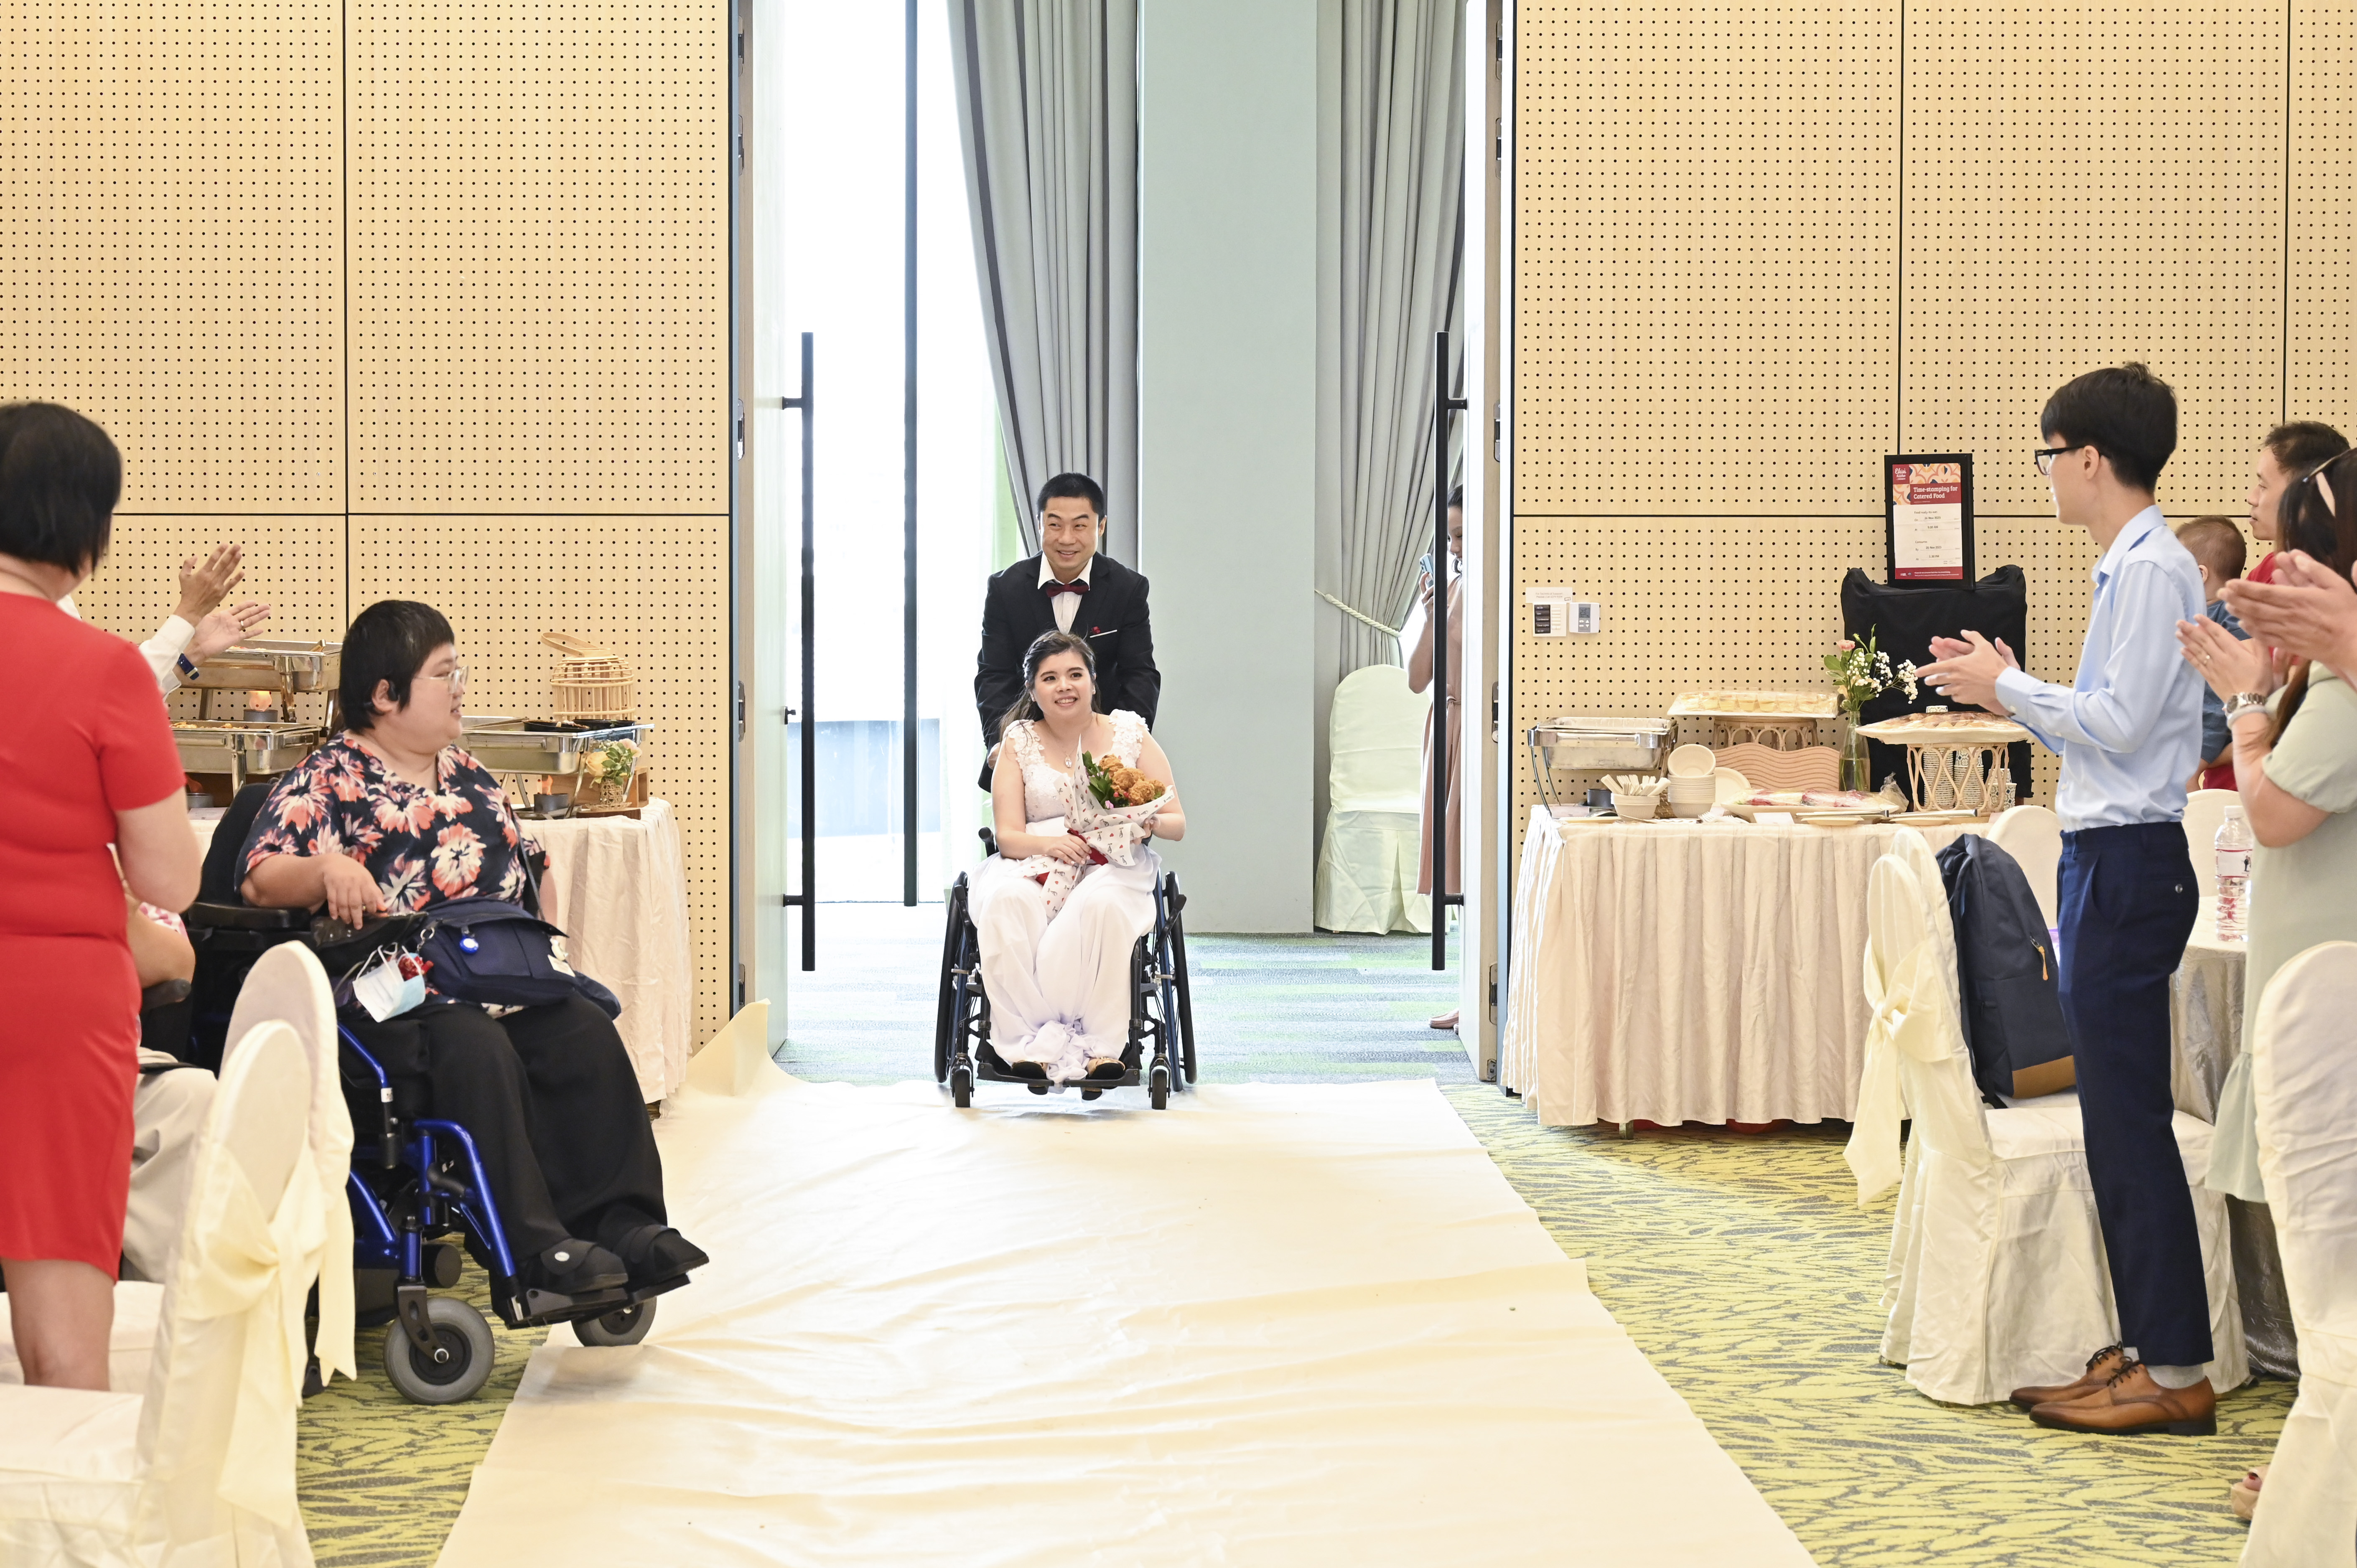 Xie peng pushes heather wong down the aisle in her wheelchair